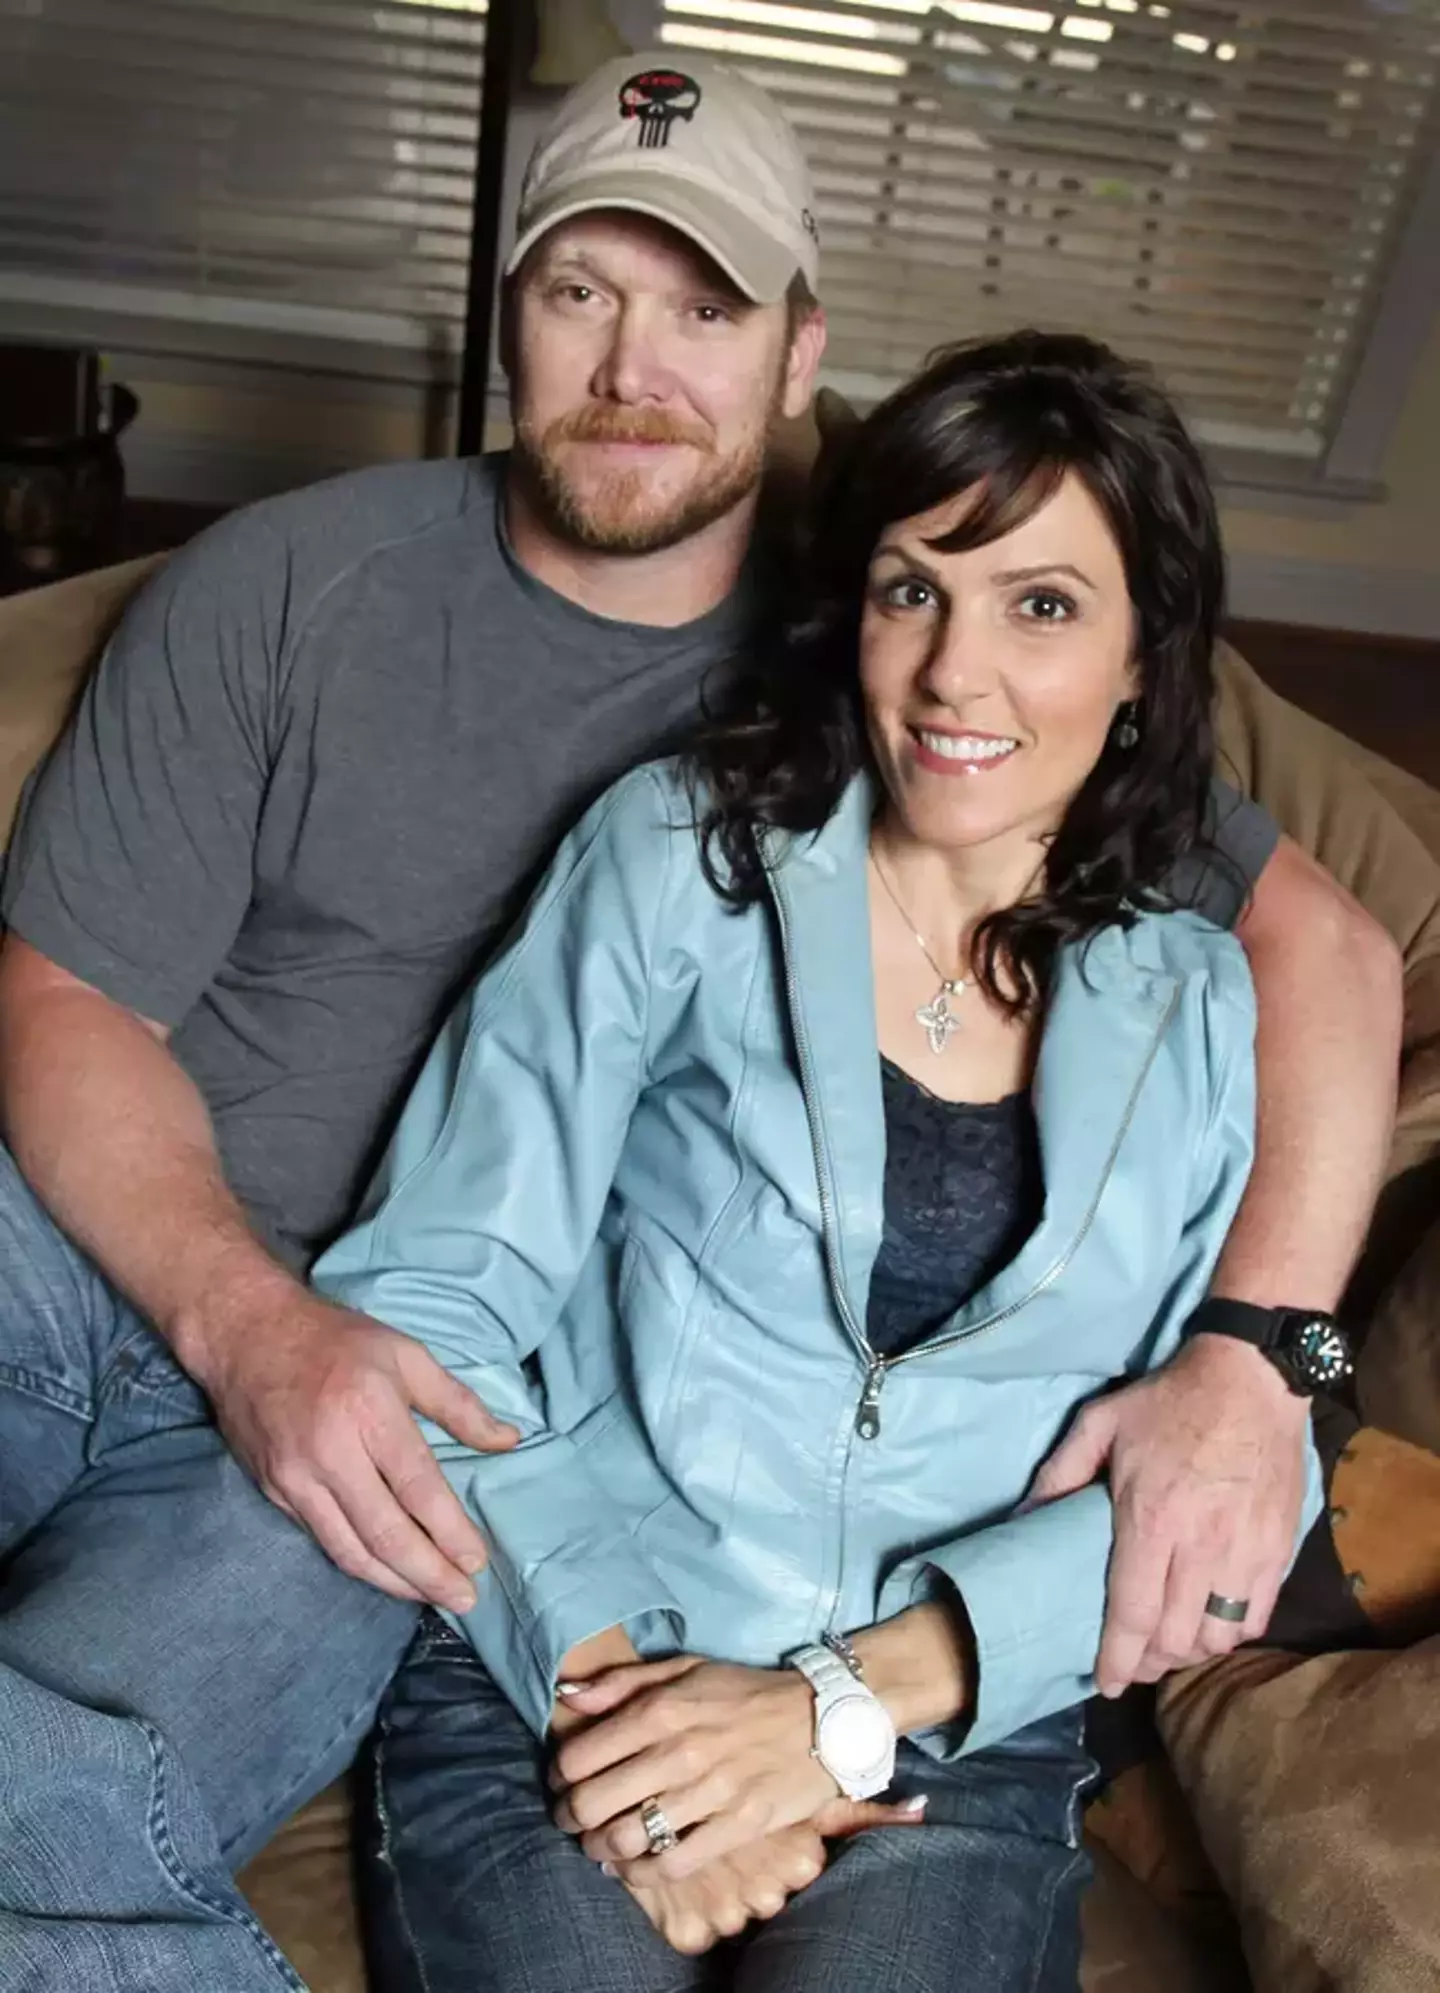 Kyle and his wife Taya, who gave emotional testimony to court after his death.